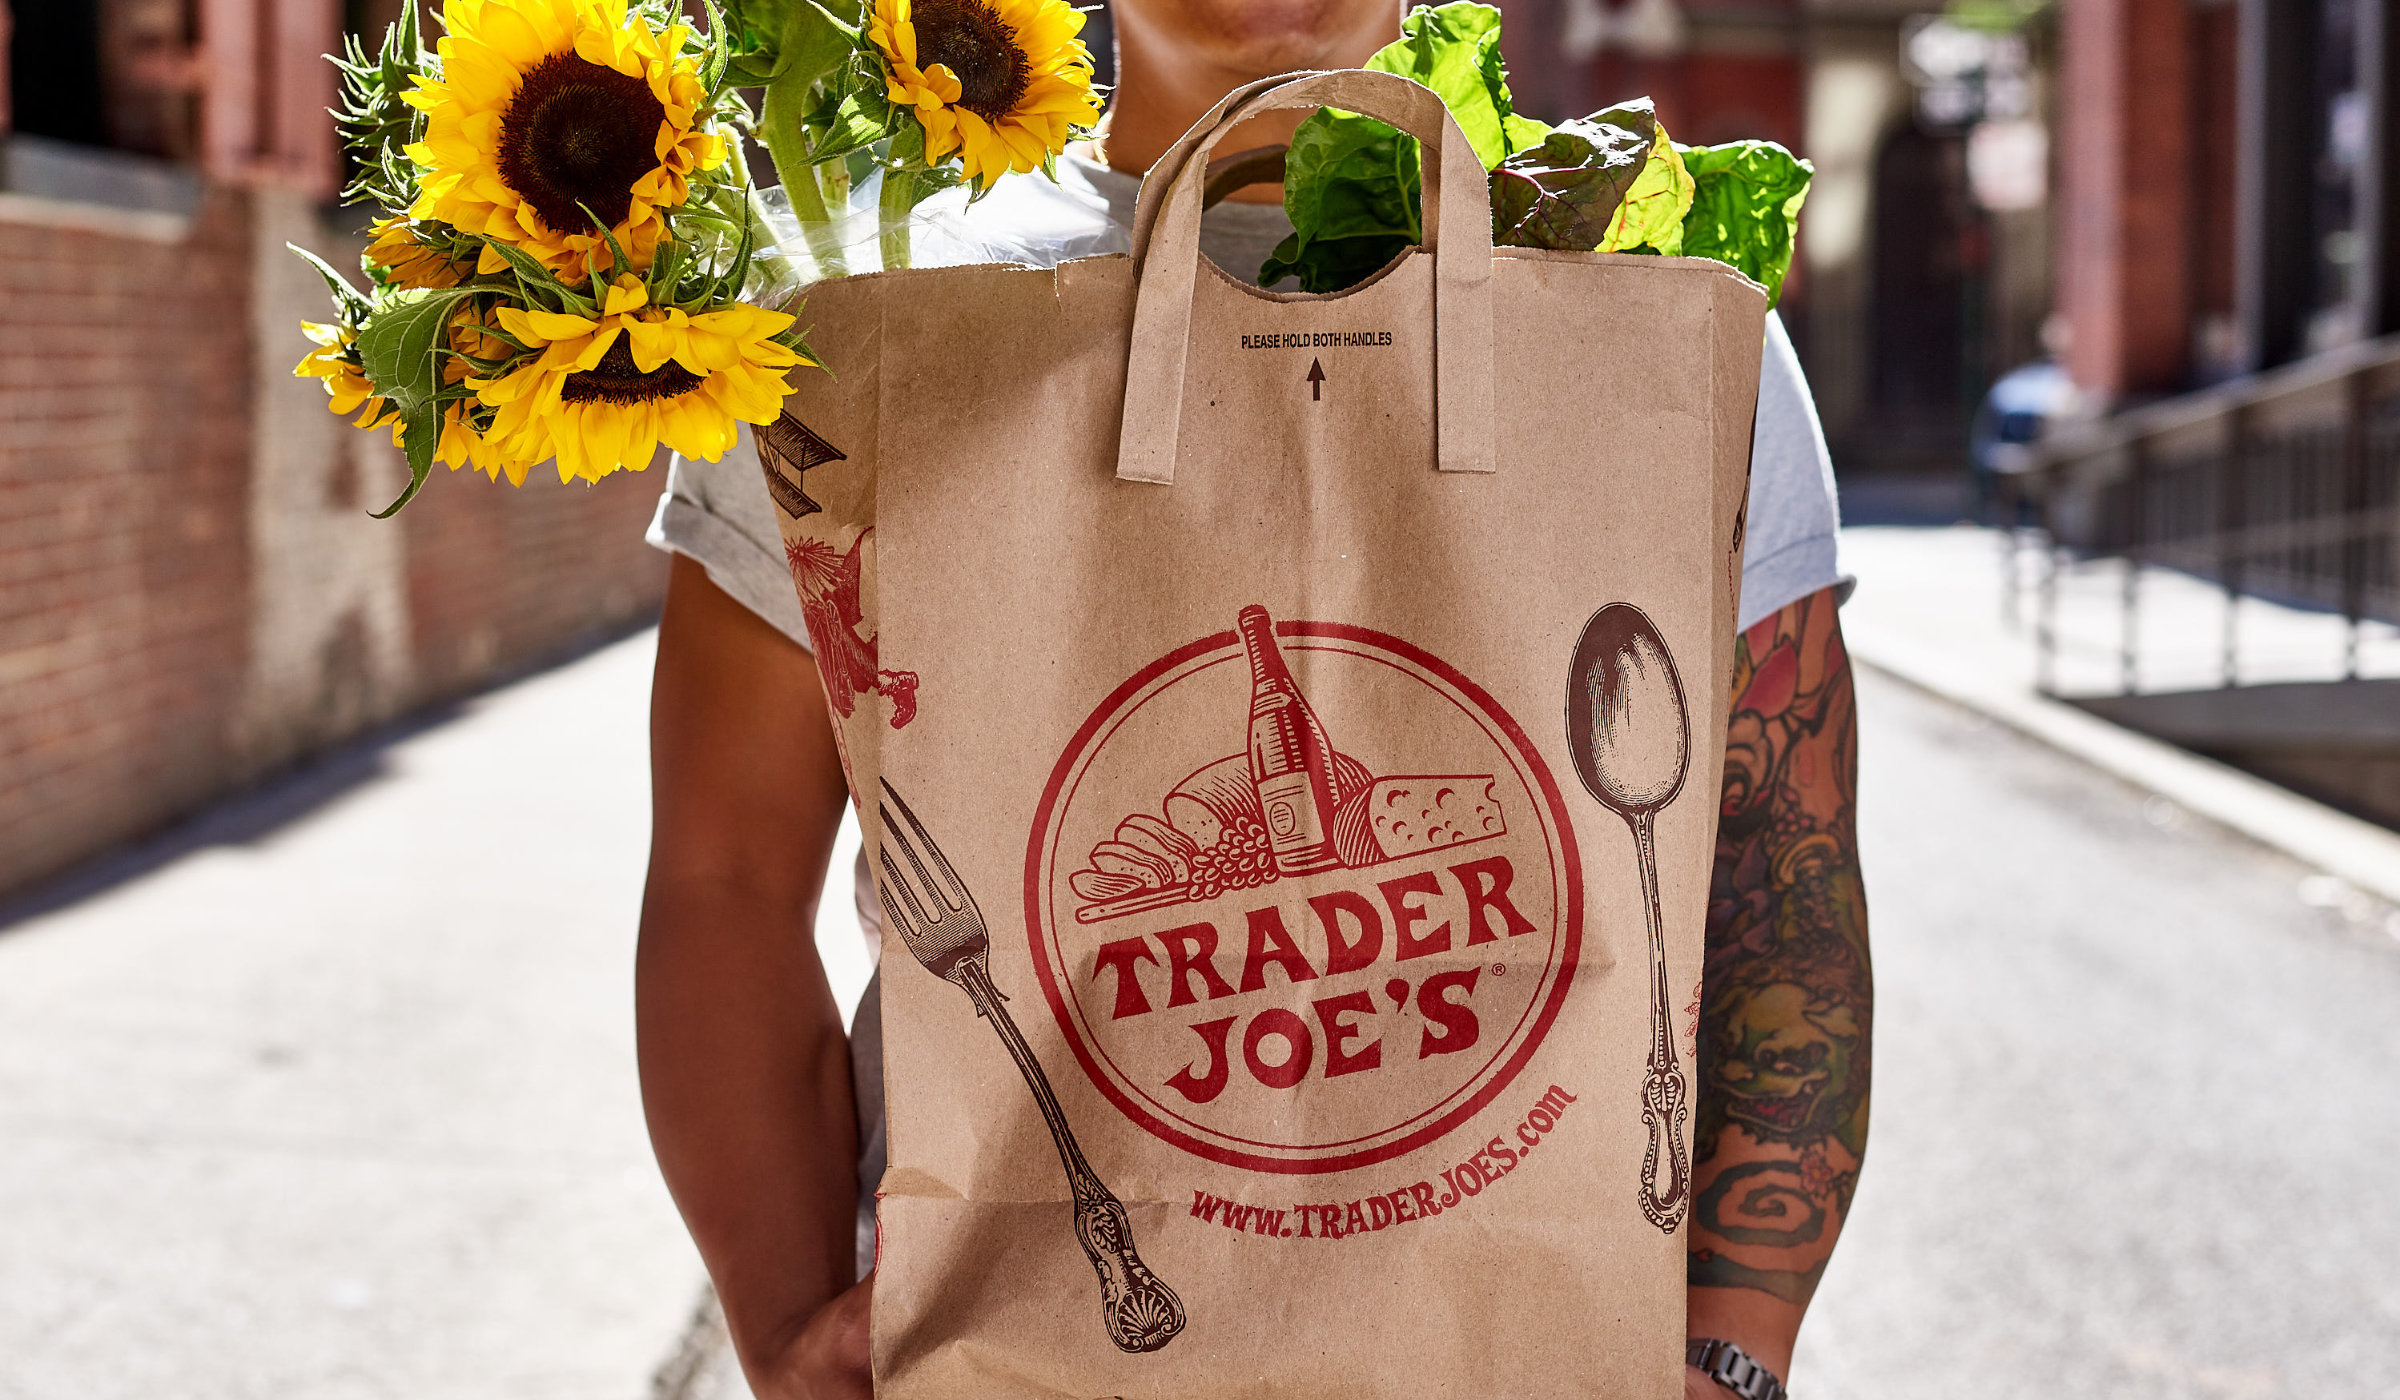 Stop for groceries at the brand-new Whole Foods or Trader Joes